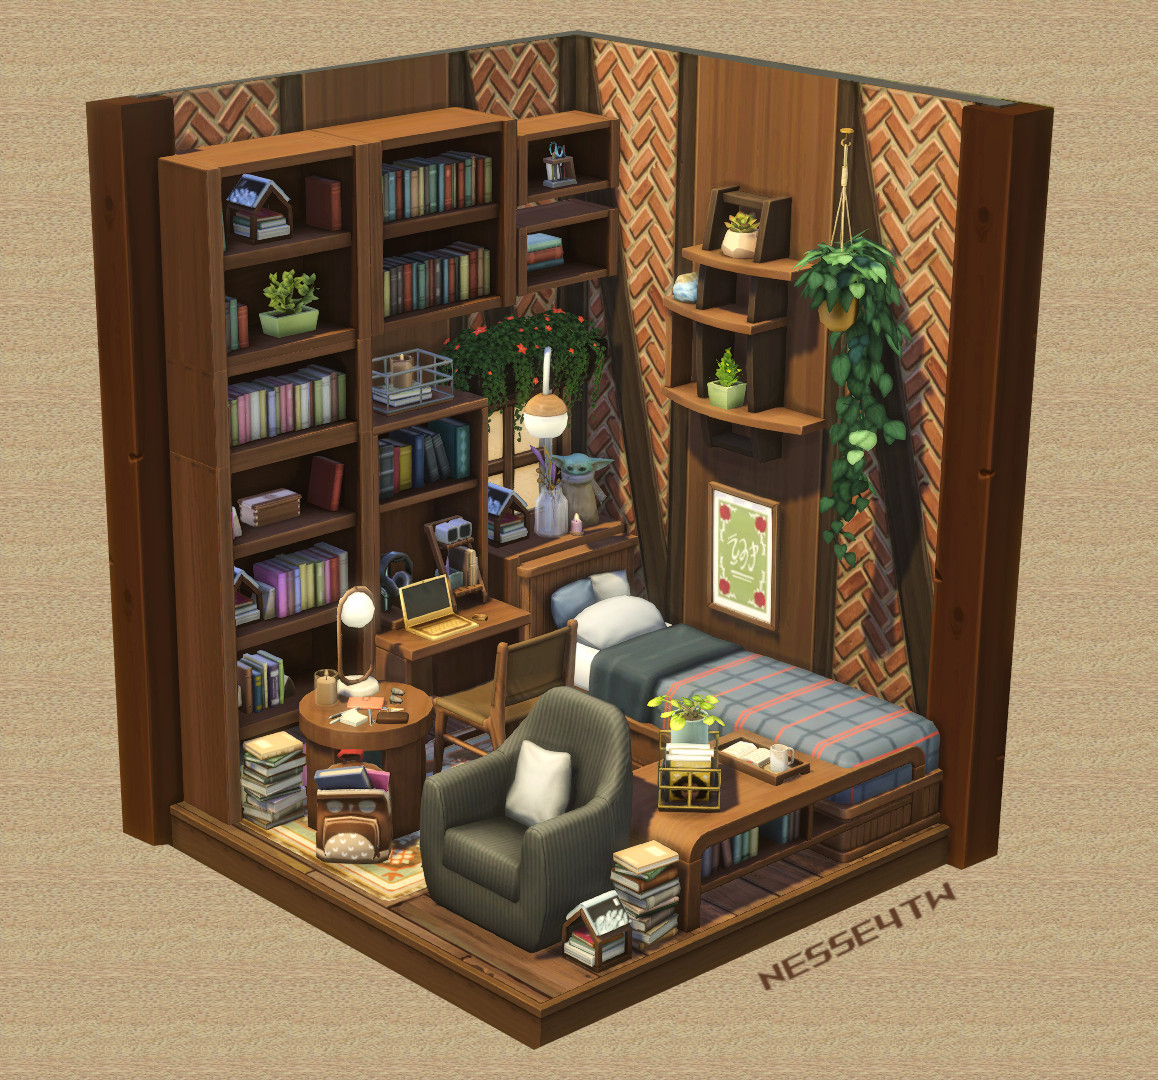 Day 14 - We Need A Baby Yoda!

'One does not simply become wise overnight!' 
'Study hard & read many, many books, you must!'

#JunBuild23 @sims4ideas #TheSims4 #TheSims #TS4 #ShowUsYourBuilds #NoCC #BookNookKit 
ID: Nesse4tw